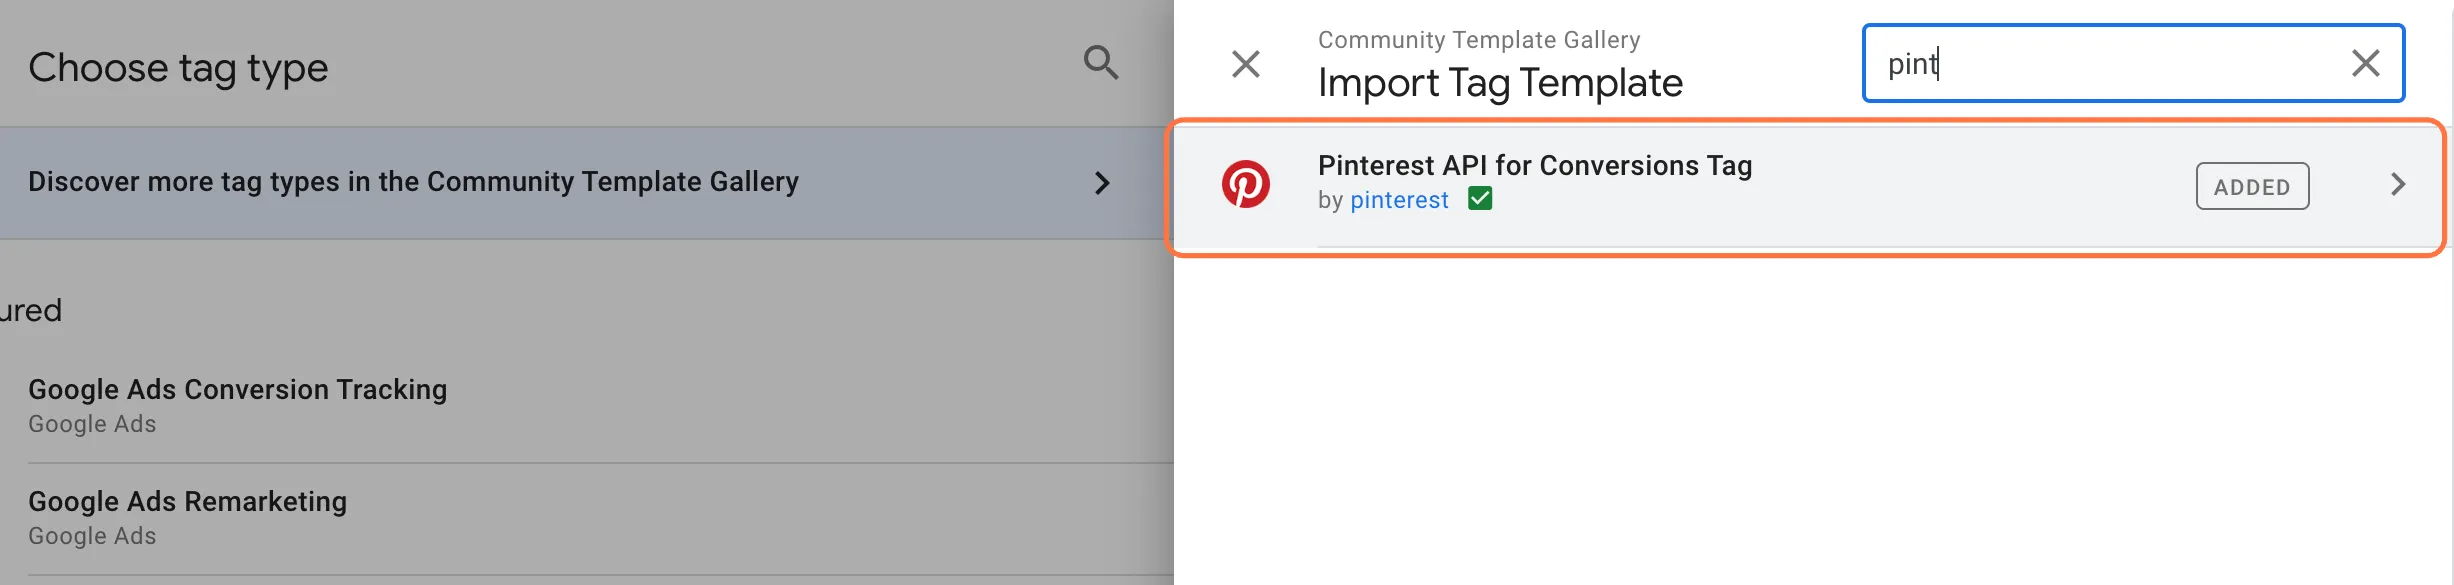 choose pinterest api for conversions tag in gtm template gallery